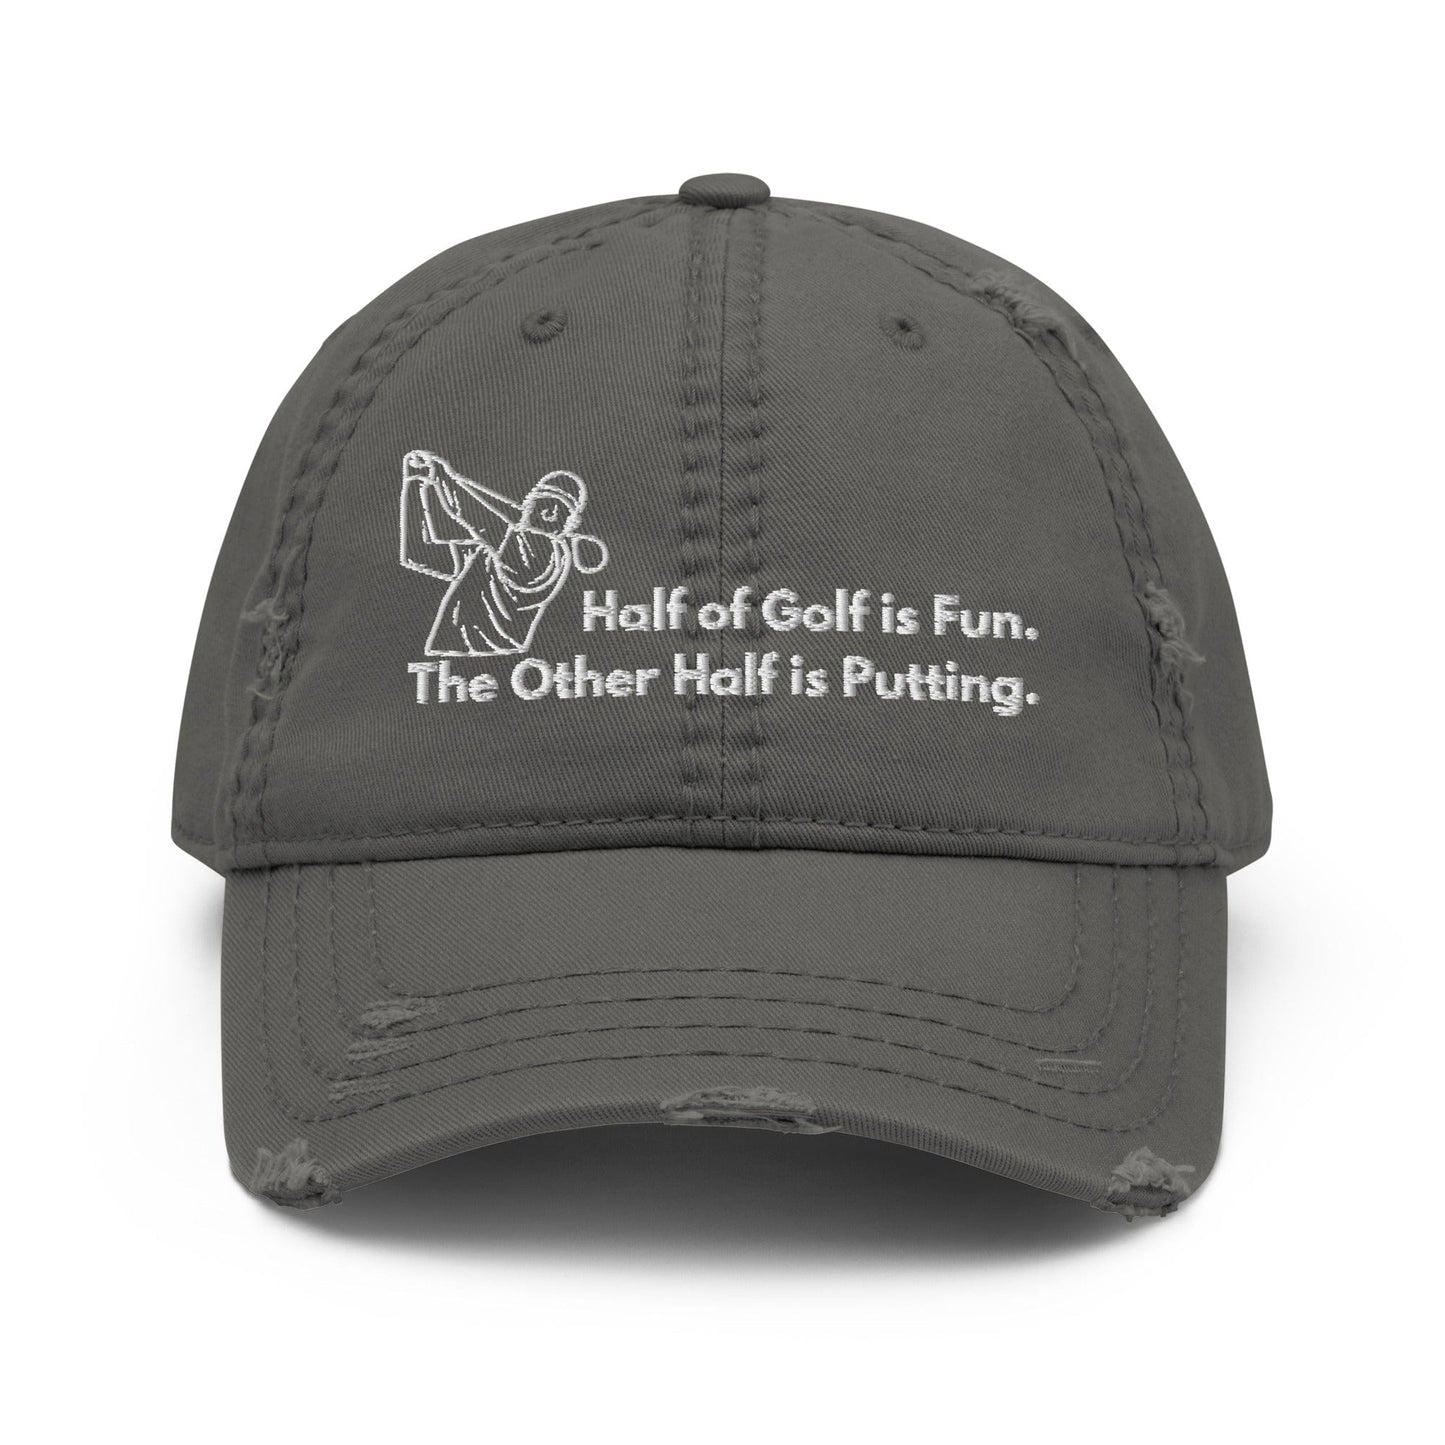 Funny Golfer Gifts  Distressed Cap Charcoal Grey Half of Golf is Fun Distressed Hat